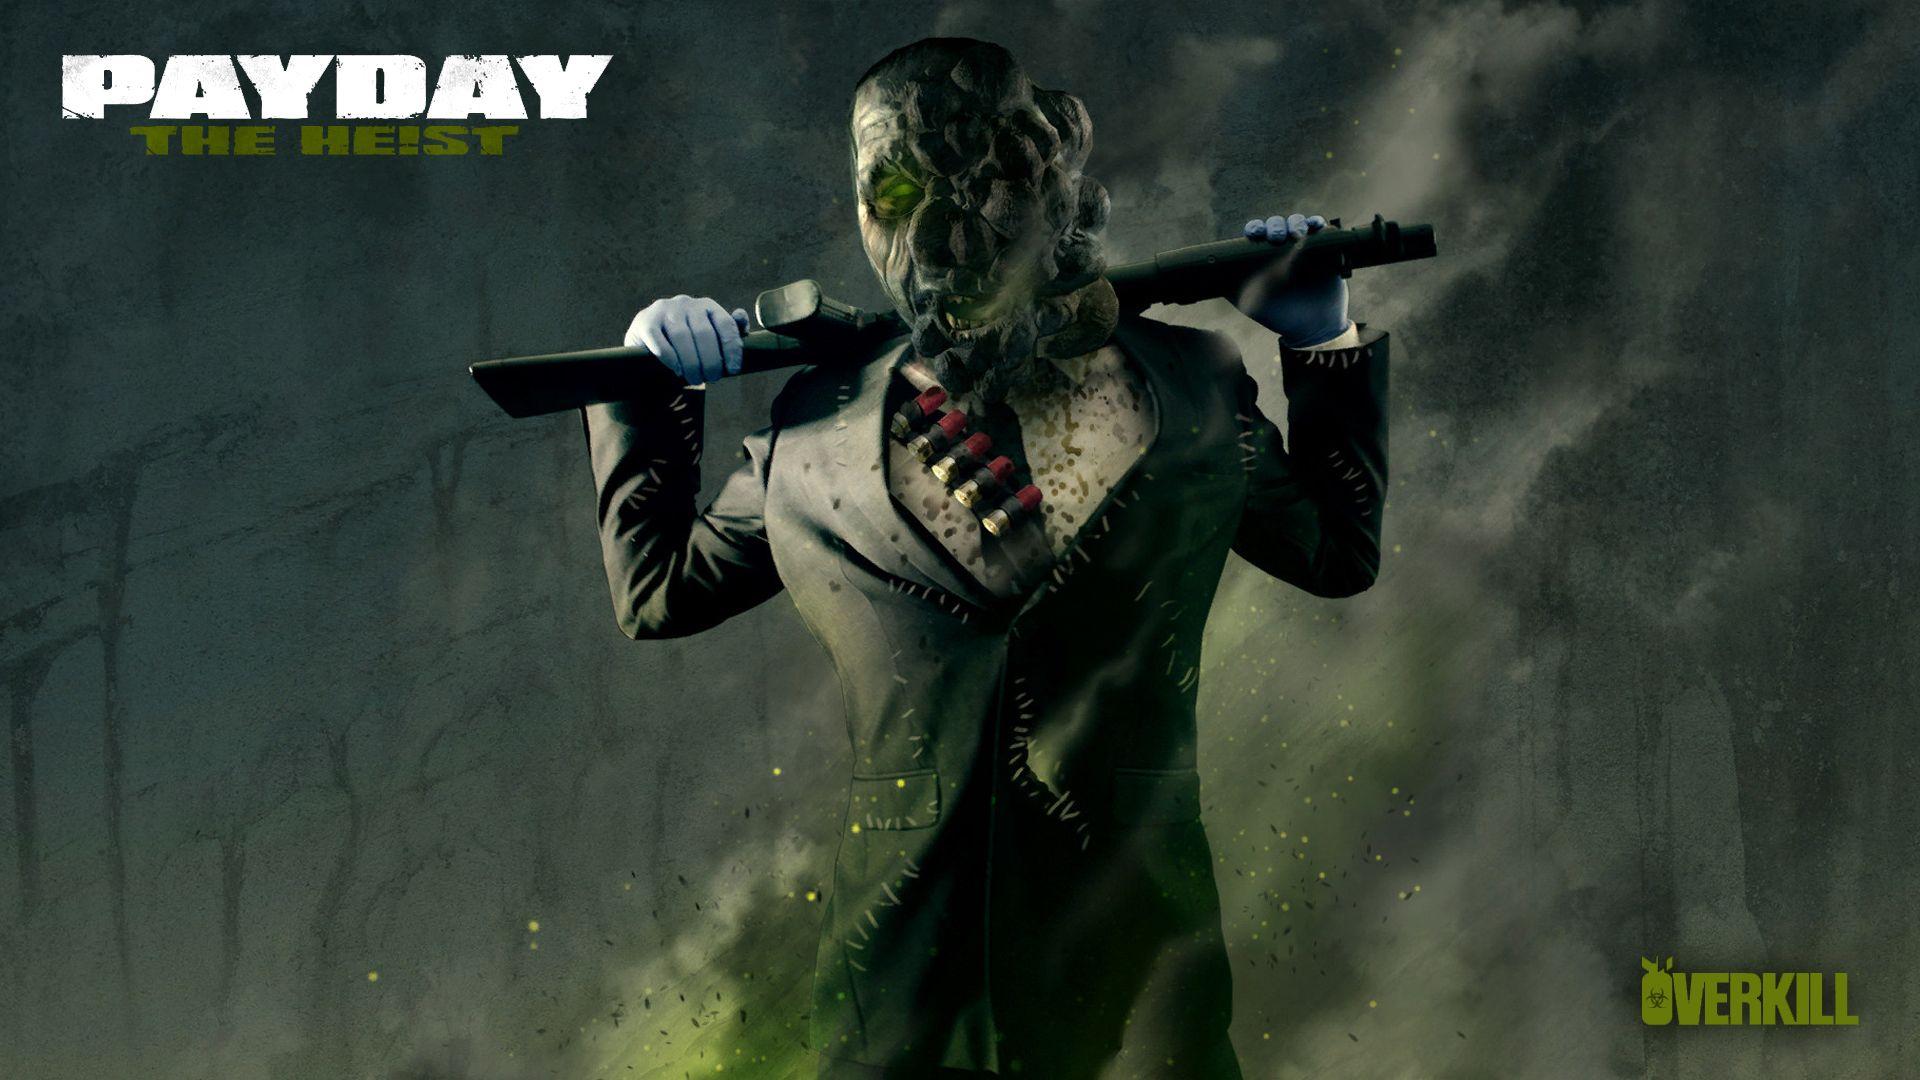 PAYDAY: The Heist ZOMBIE WP w/ Reinbeck